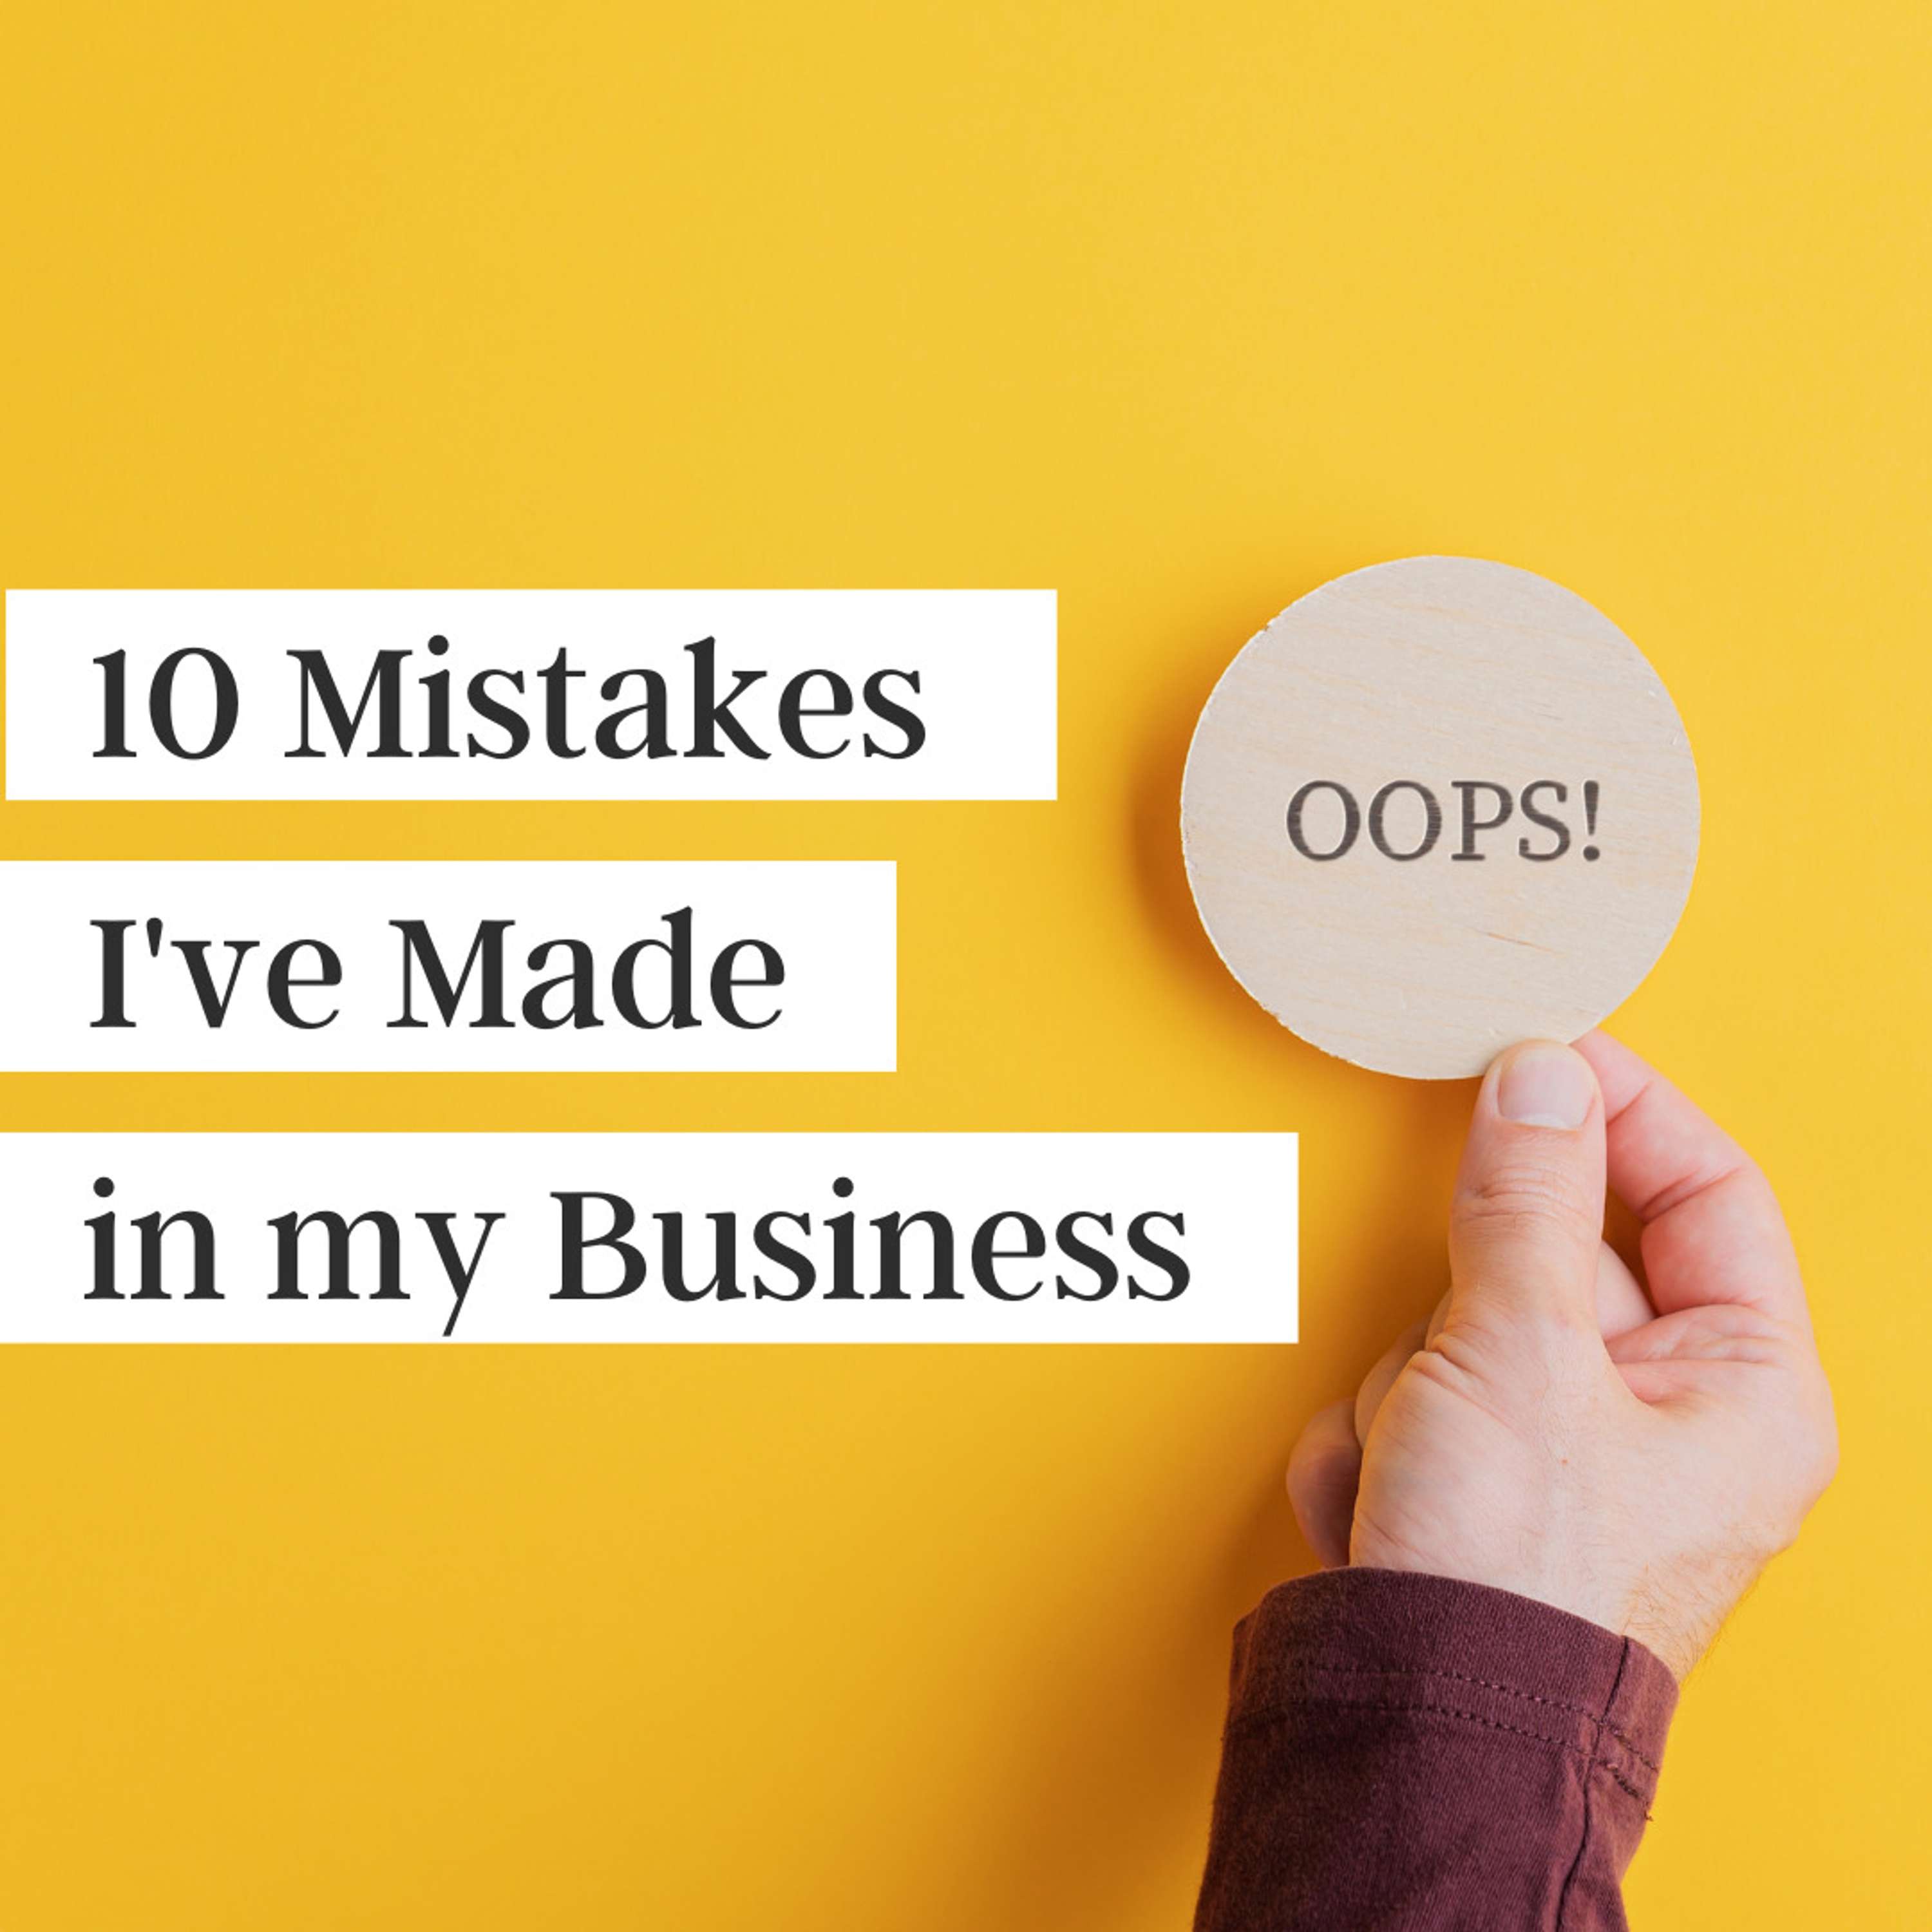 10 Mistakes I’ve Made in My Business